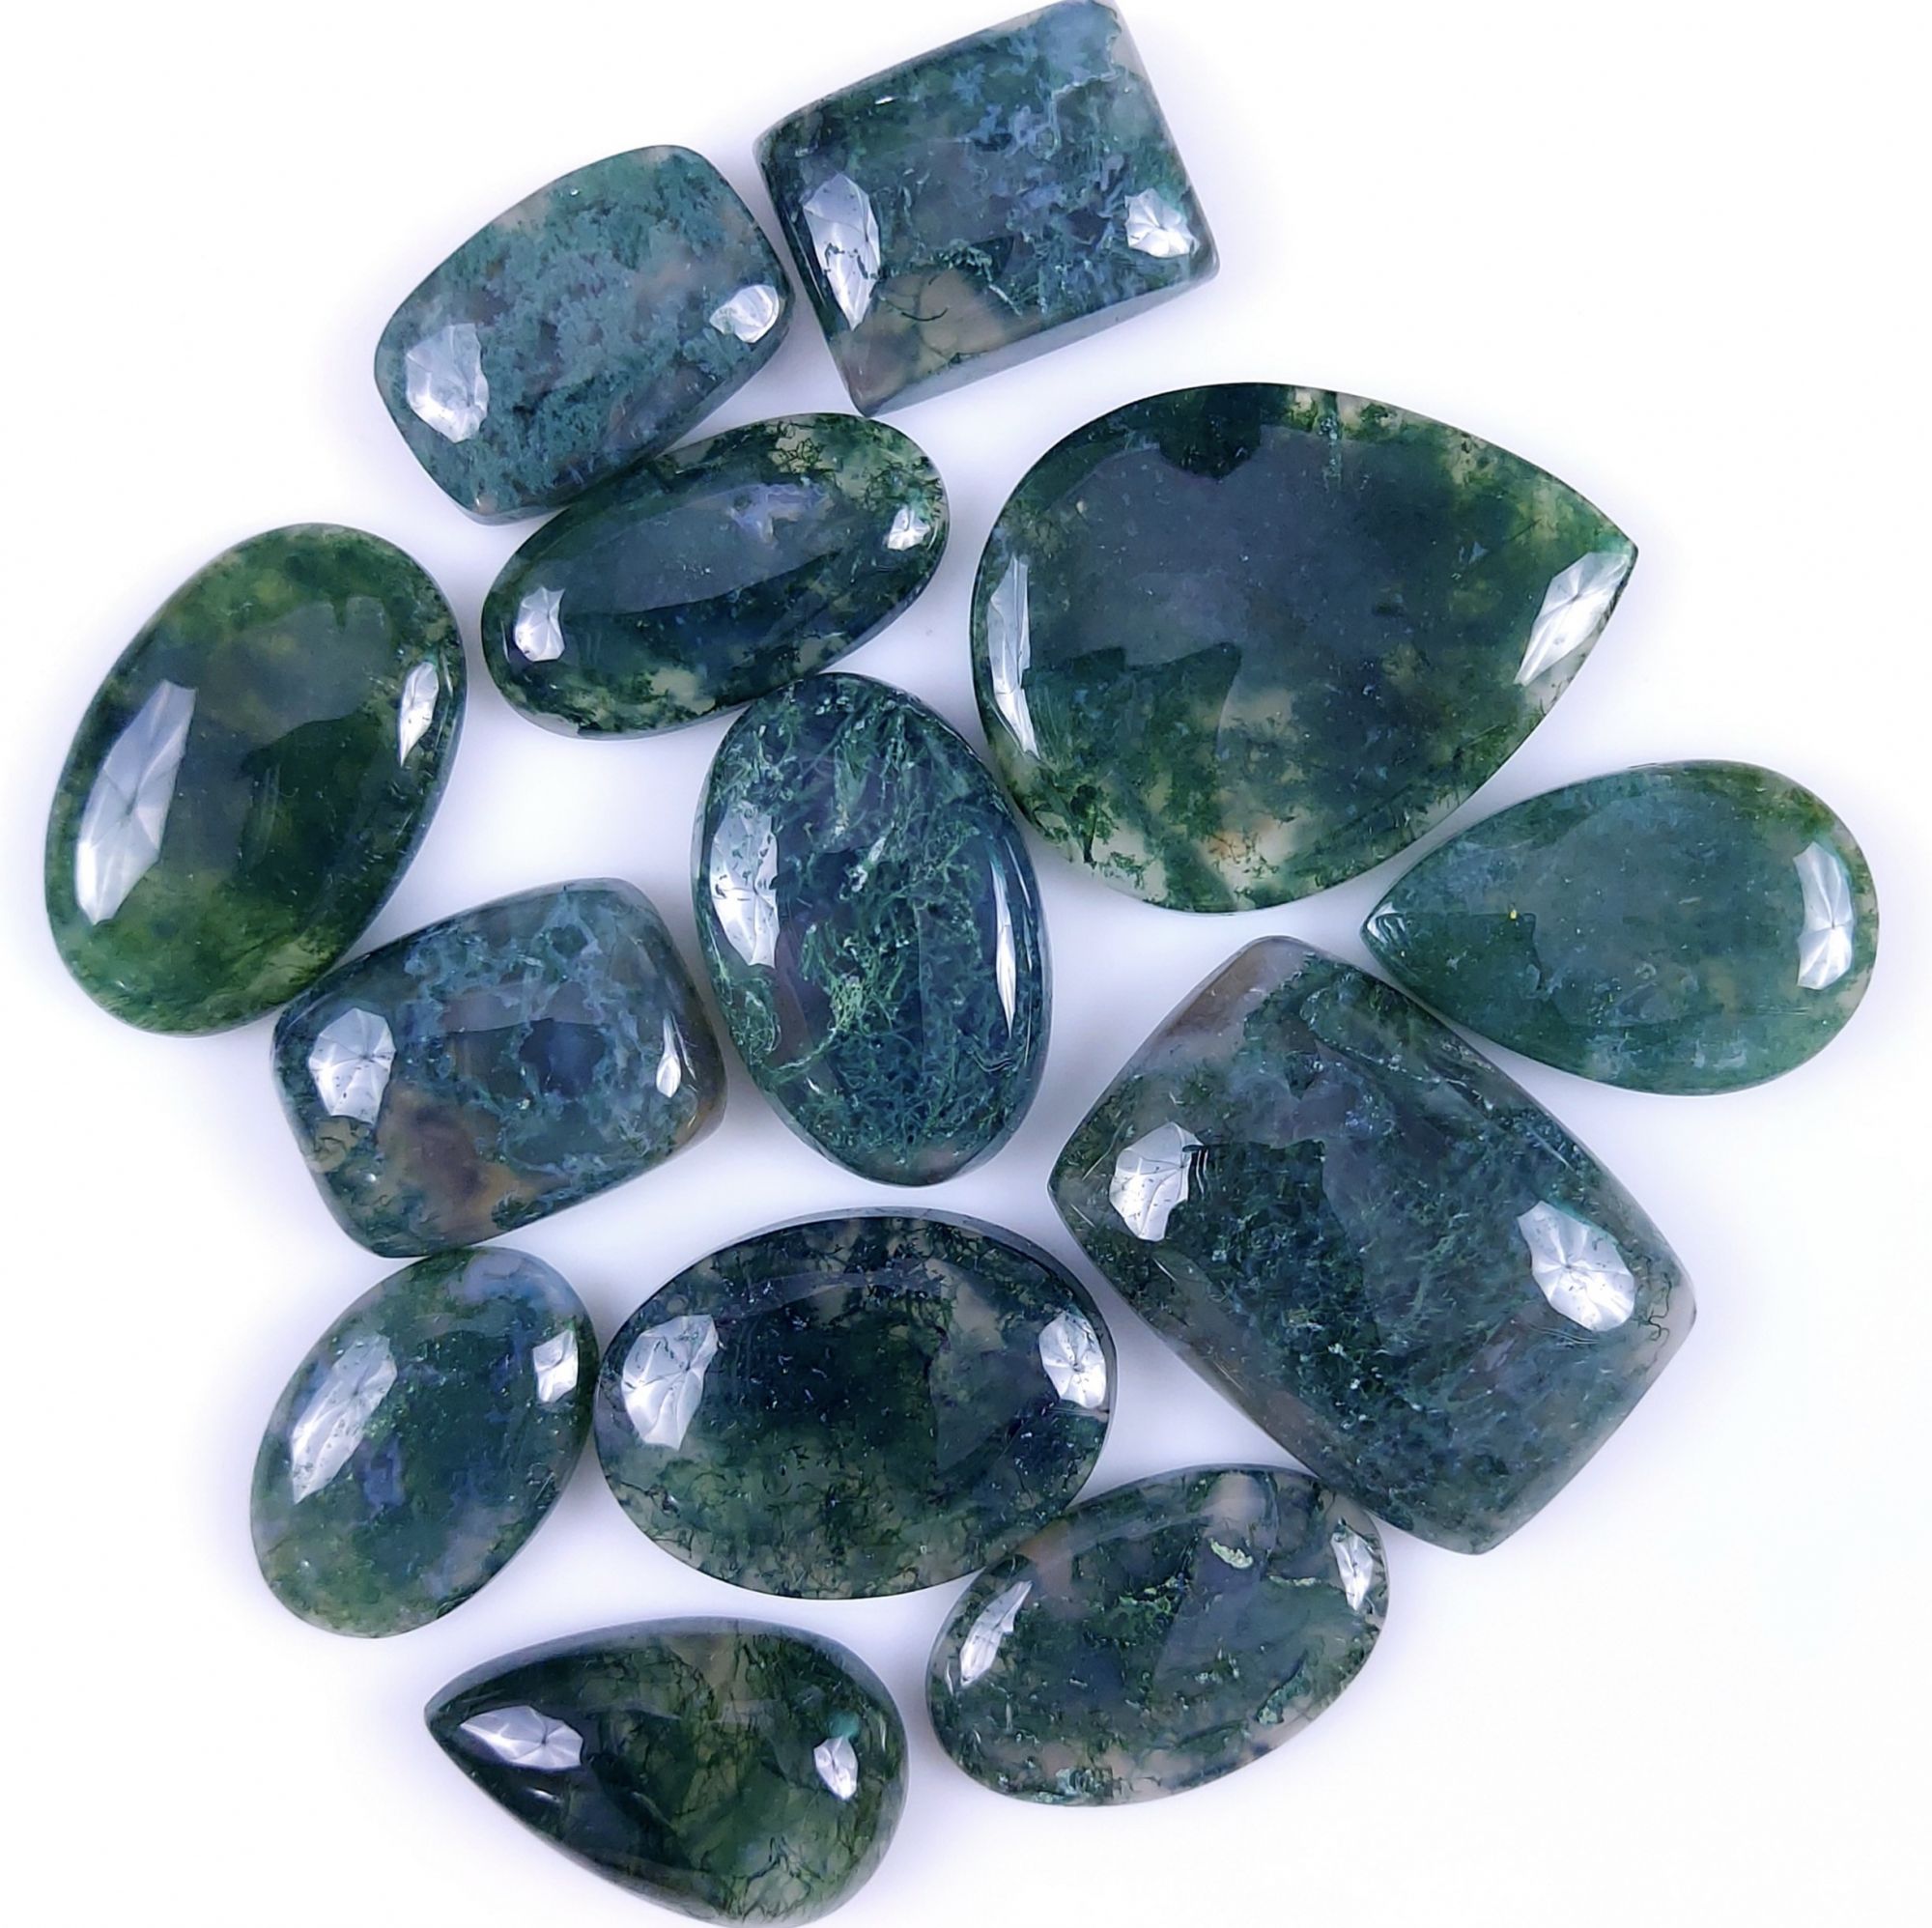 16Pcs 176Cts Natural Green Moss Agate Cabochon Lots Mixed Shapes And Sizes Moss Agate loose gemstone Cabochon Wholesale Lot 22x15 15x10mm #8082